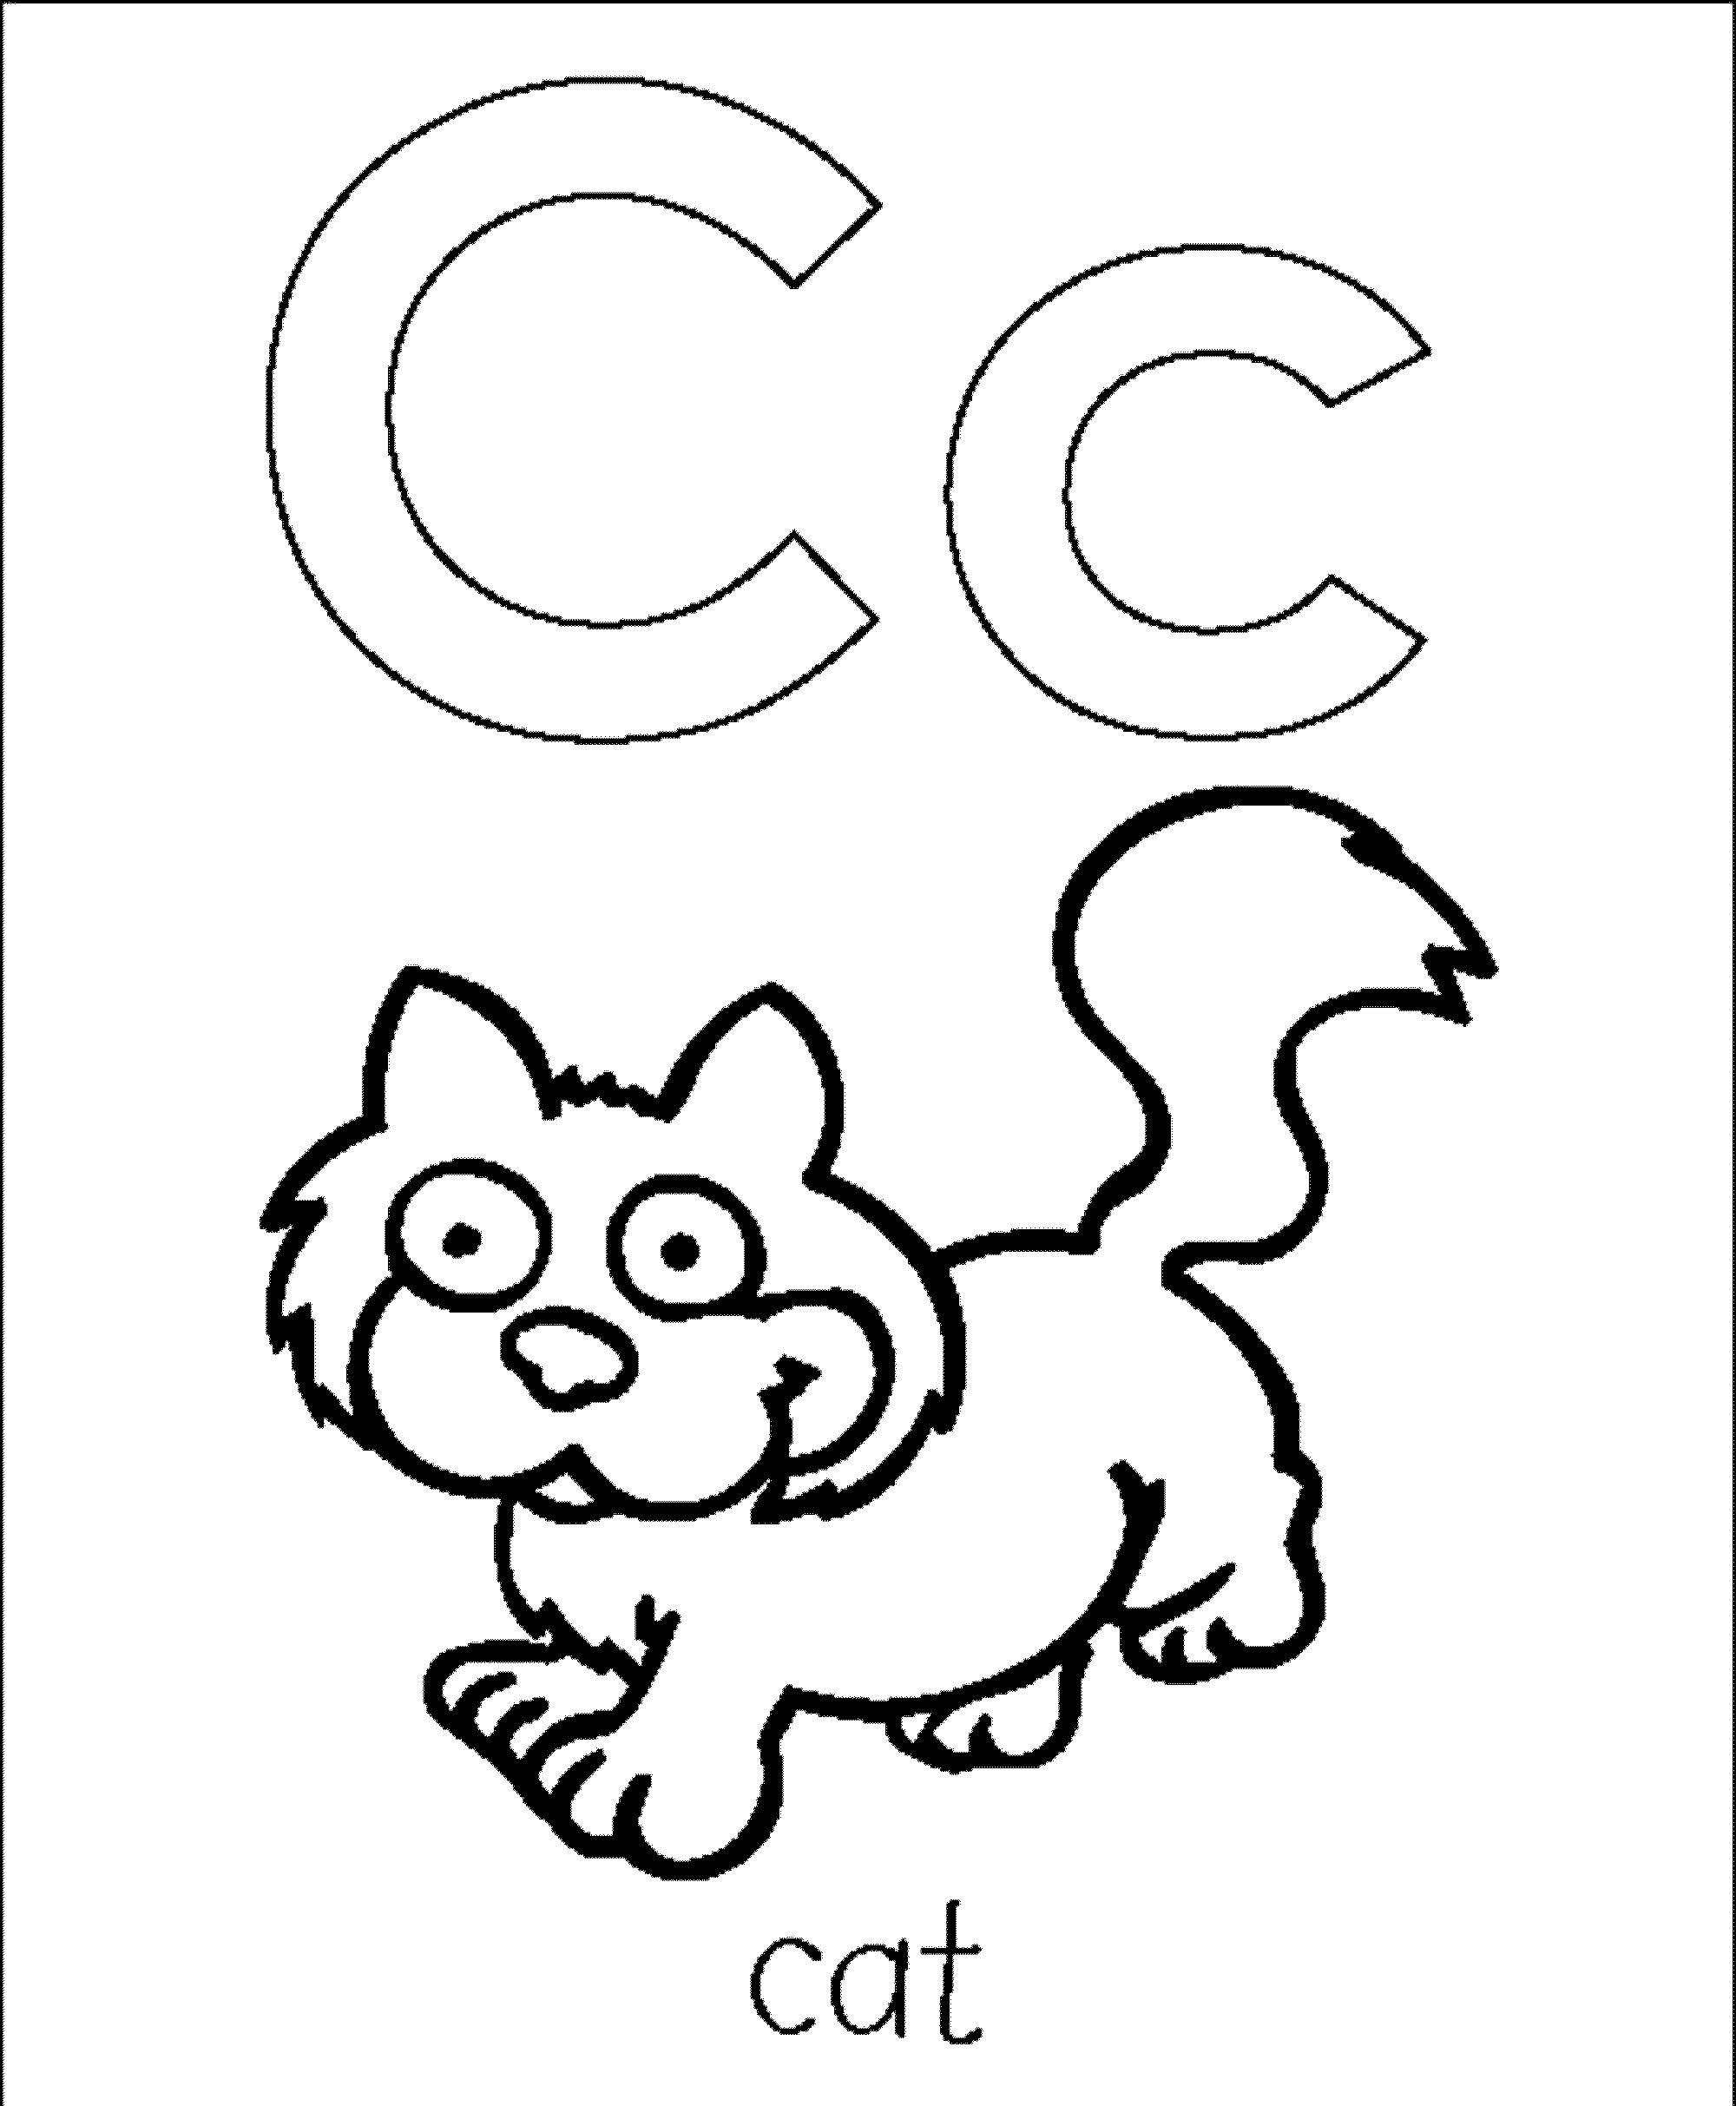 Letter C Coloring Pages For Preschoolers Letter C Cats Coloring Pages For Preschoolers Bestappsforkids